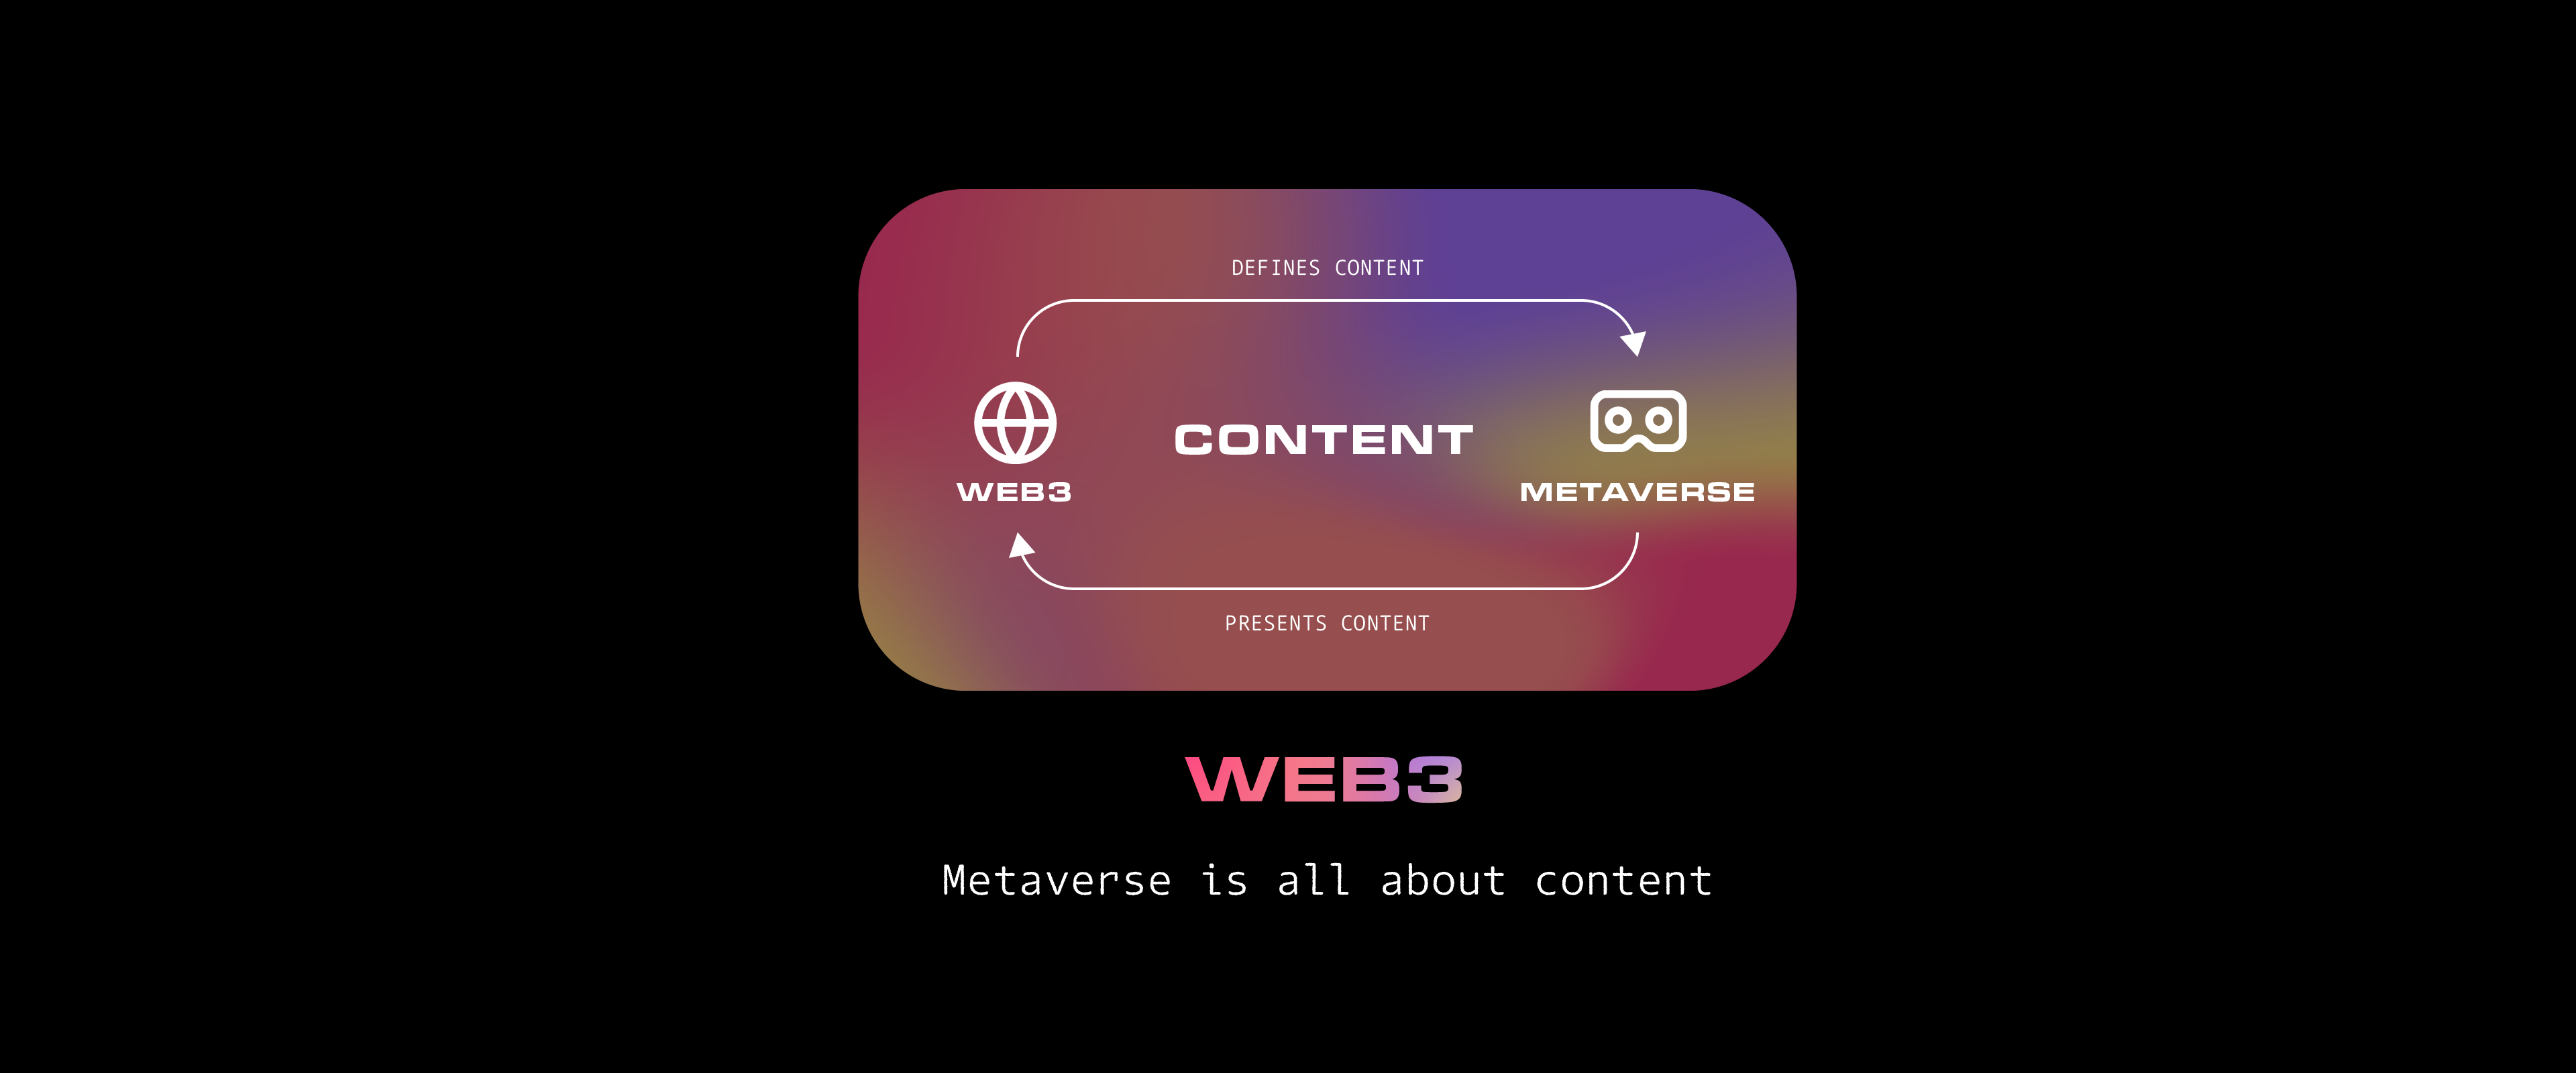 The metaverse is all about content (and therefore NFTs)